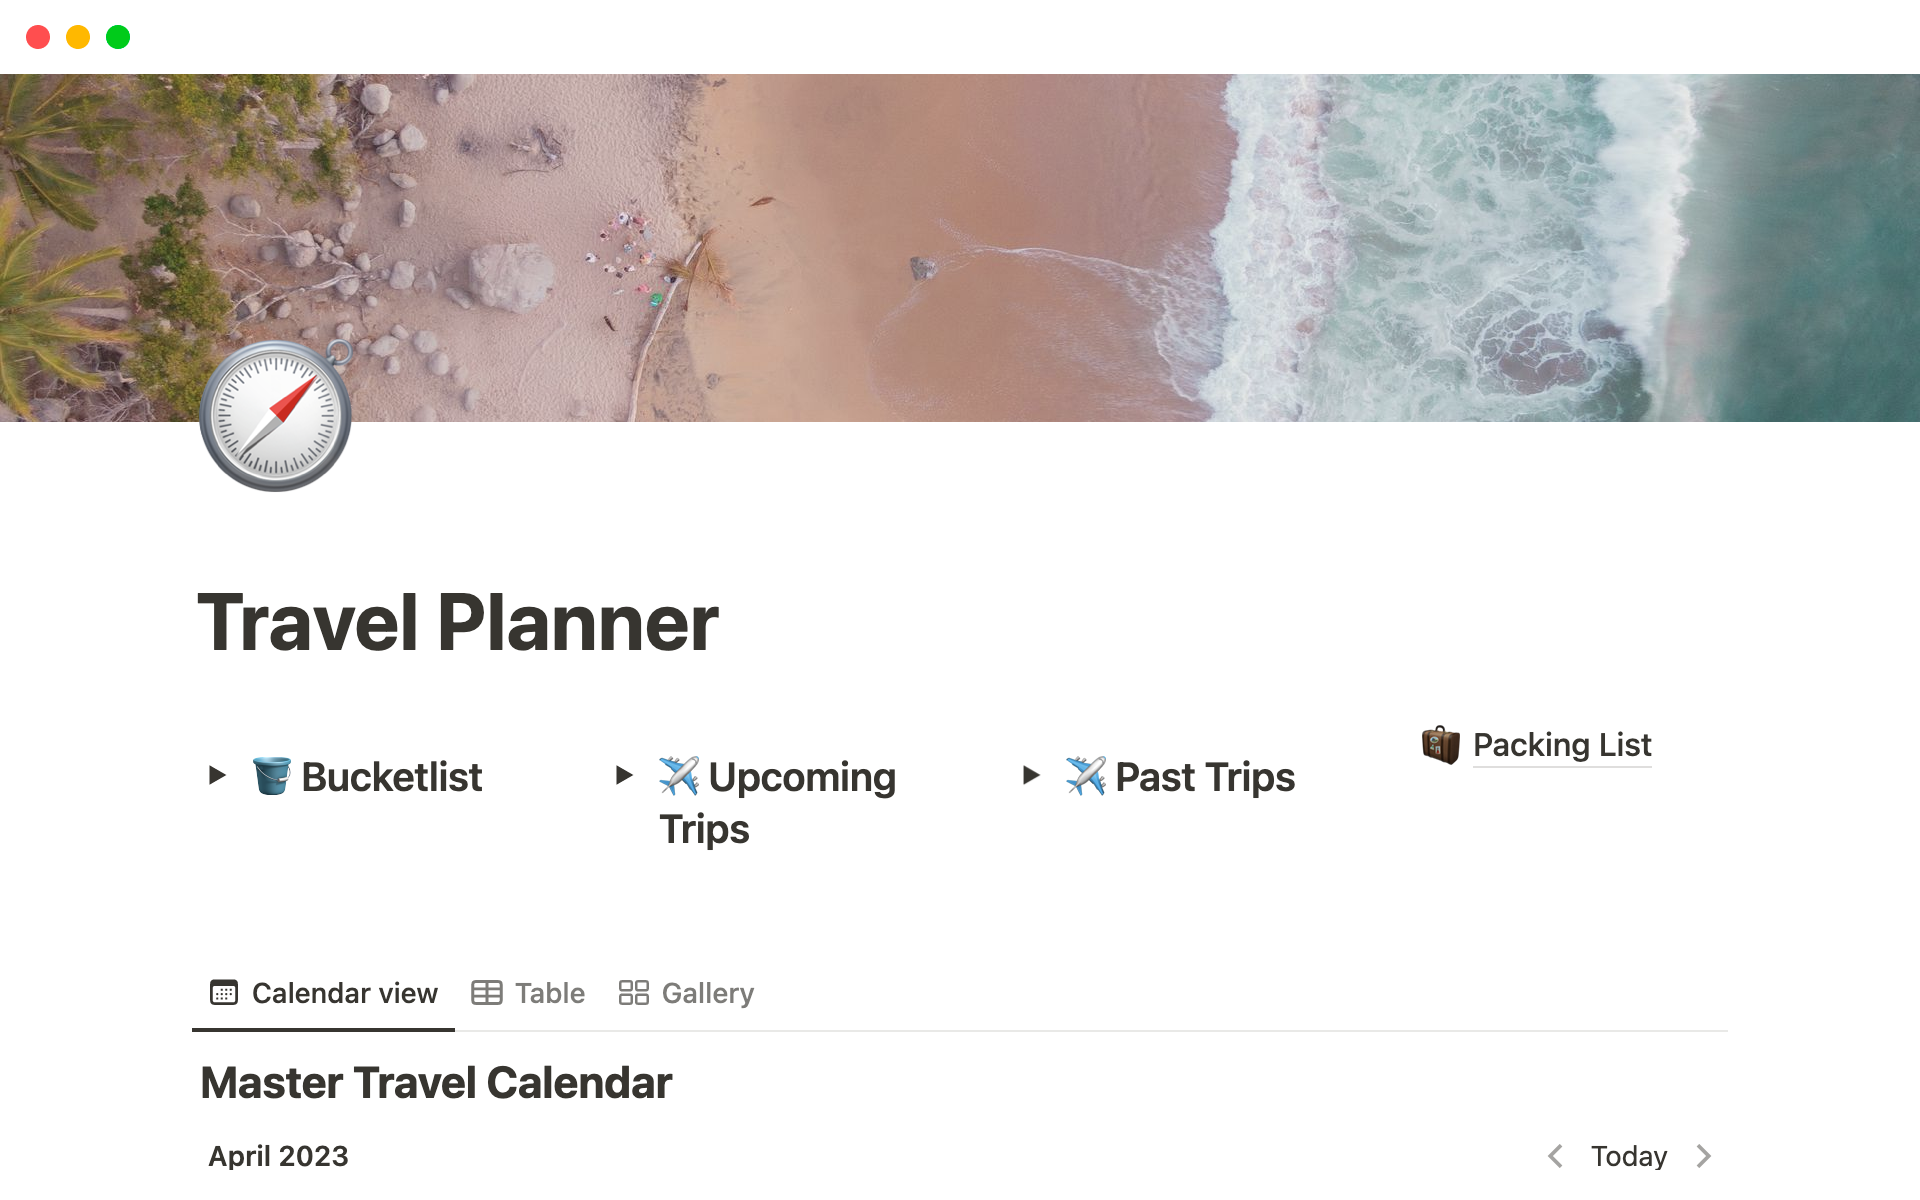 Plan and Organize your Trip so nothing is forgotten.